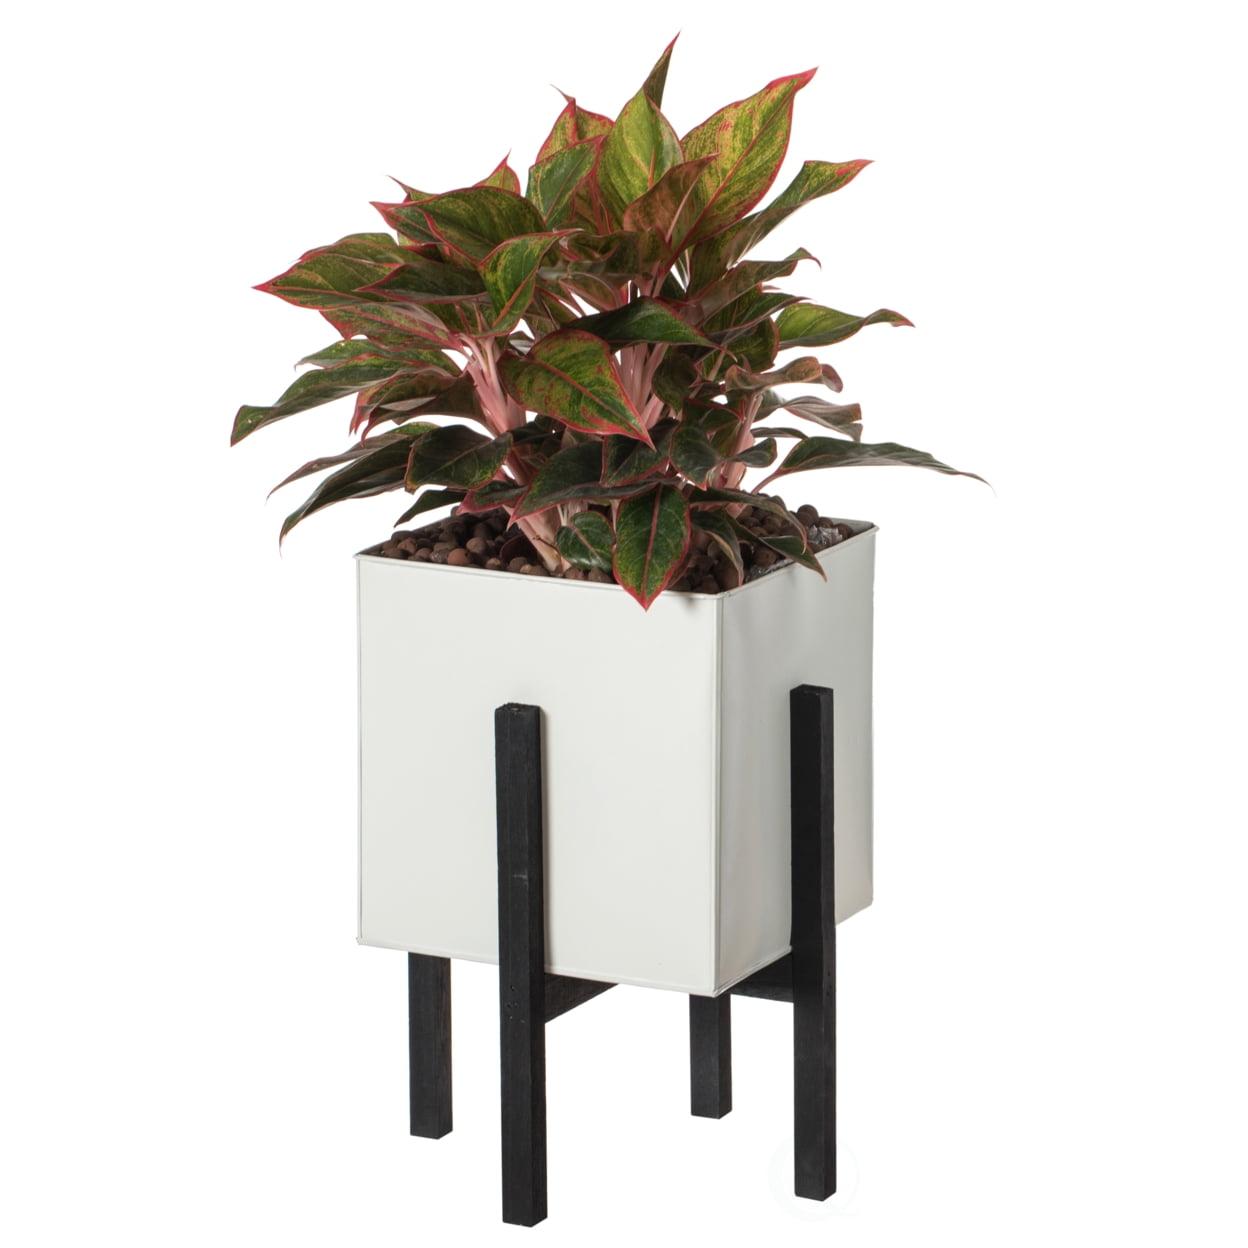 Elevated White Iron Planter Box with Black Wooden Stand, Large